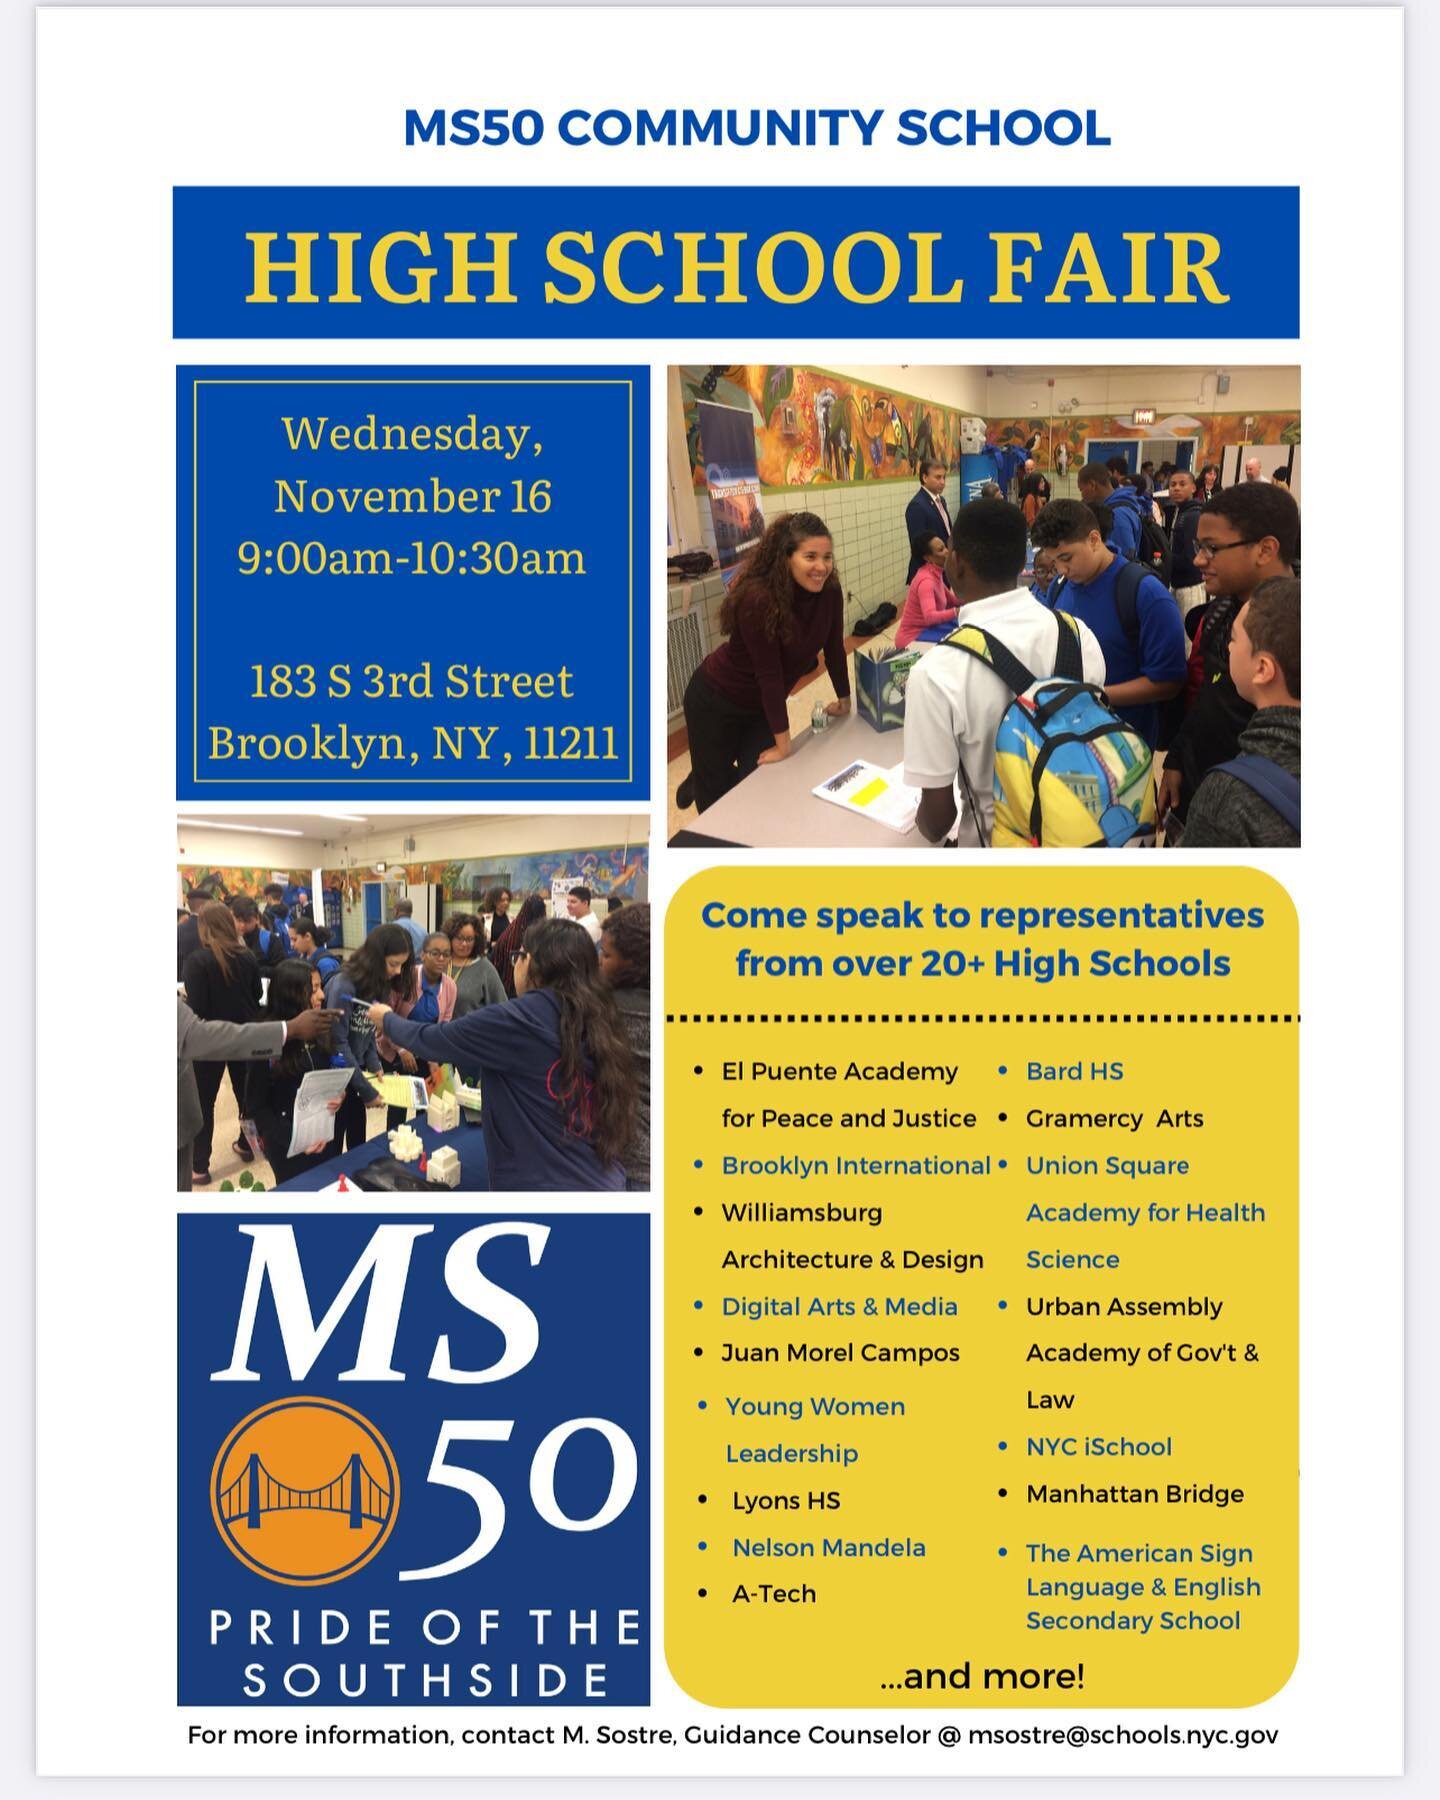 We&rsquo;re excited to be hosting a High School fair for all of our 8th graders this WEDNESDAY 11/16 from 9-10:30am. We have over 20 High Schools represented, you don&rsquo;t want to miss this!